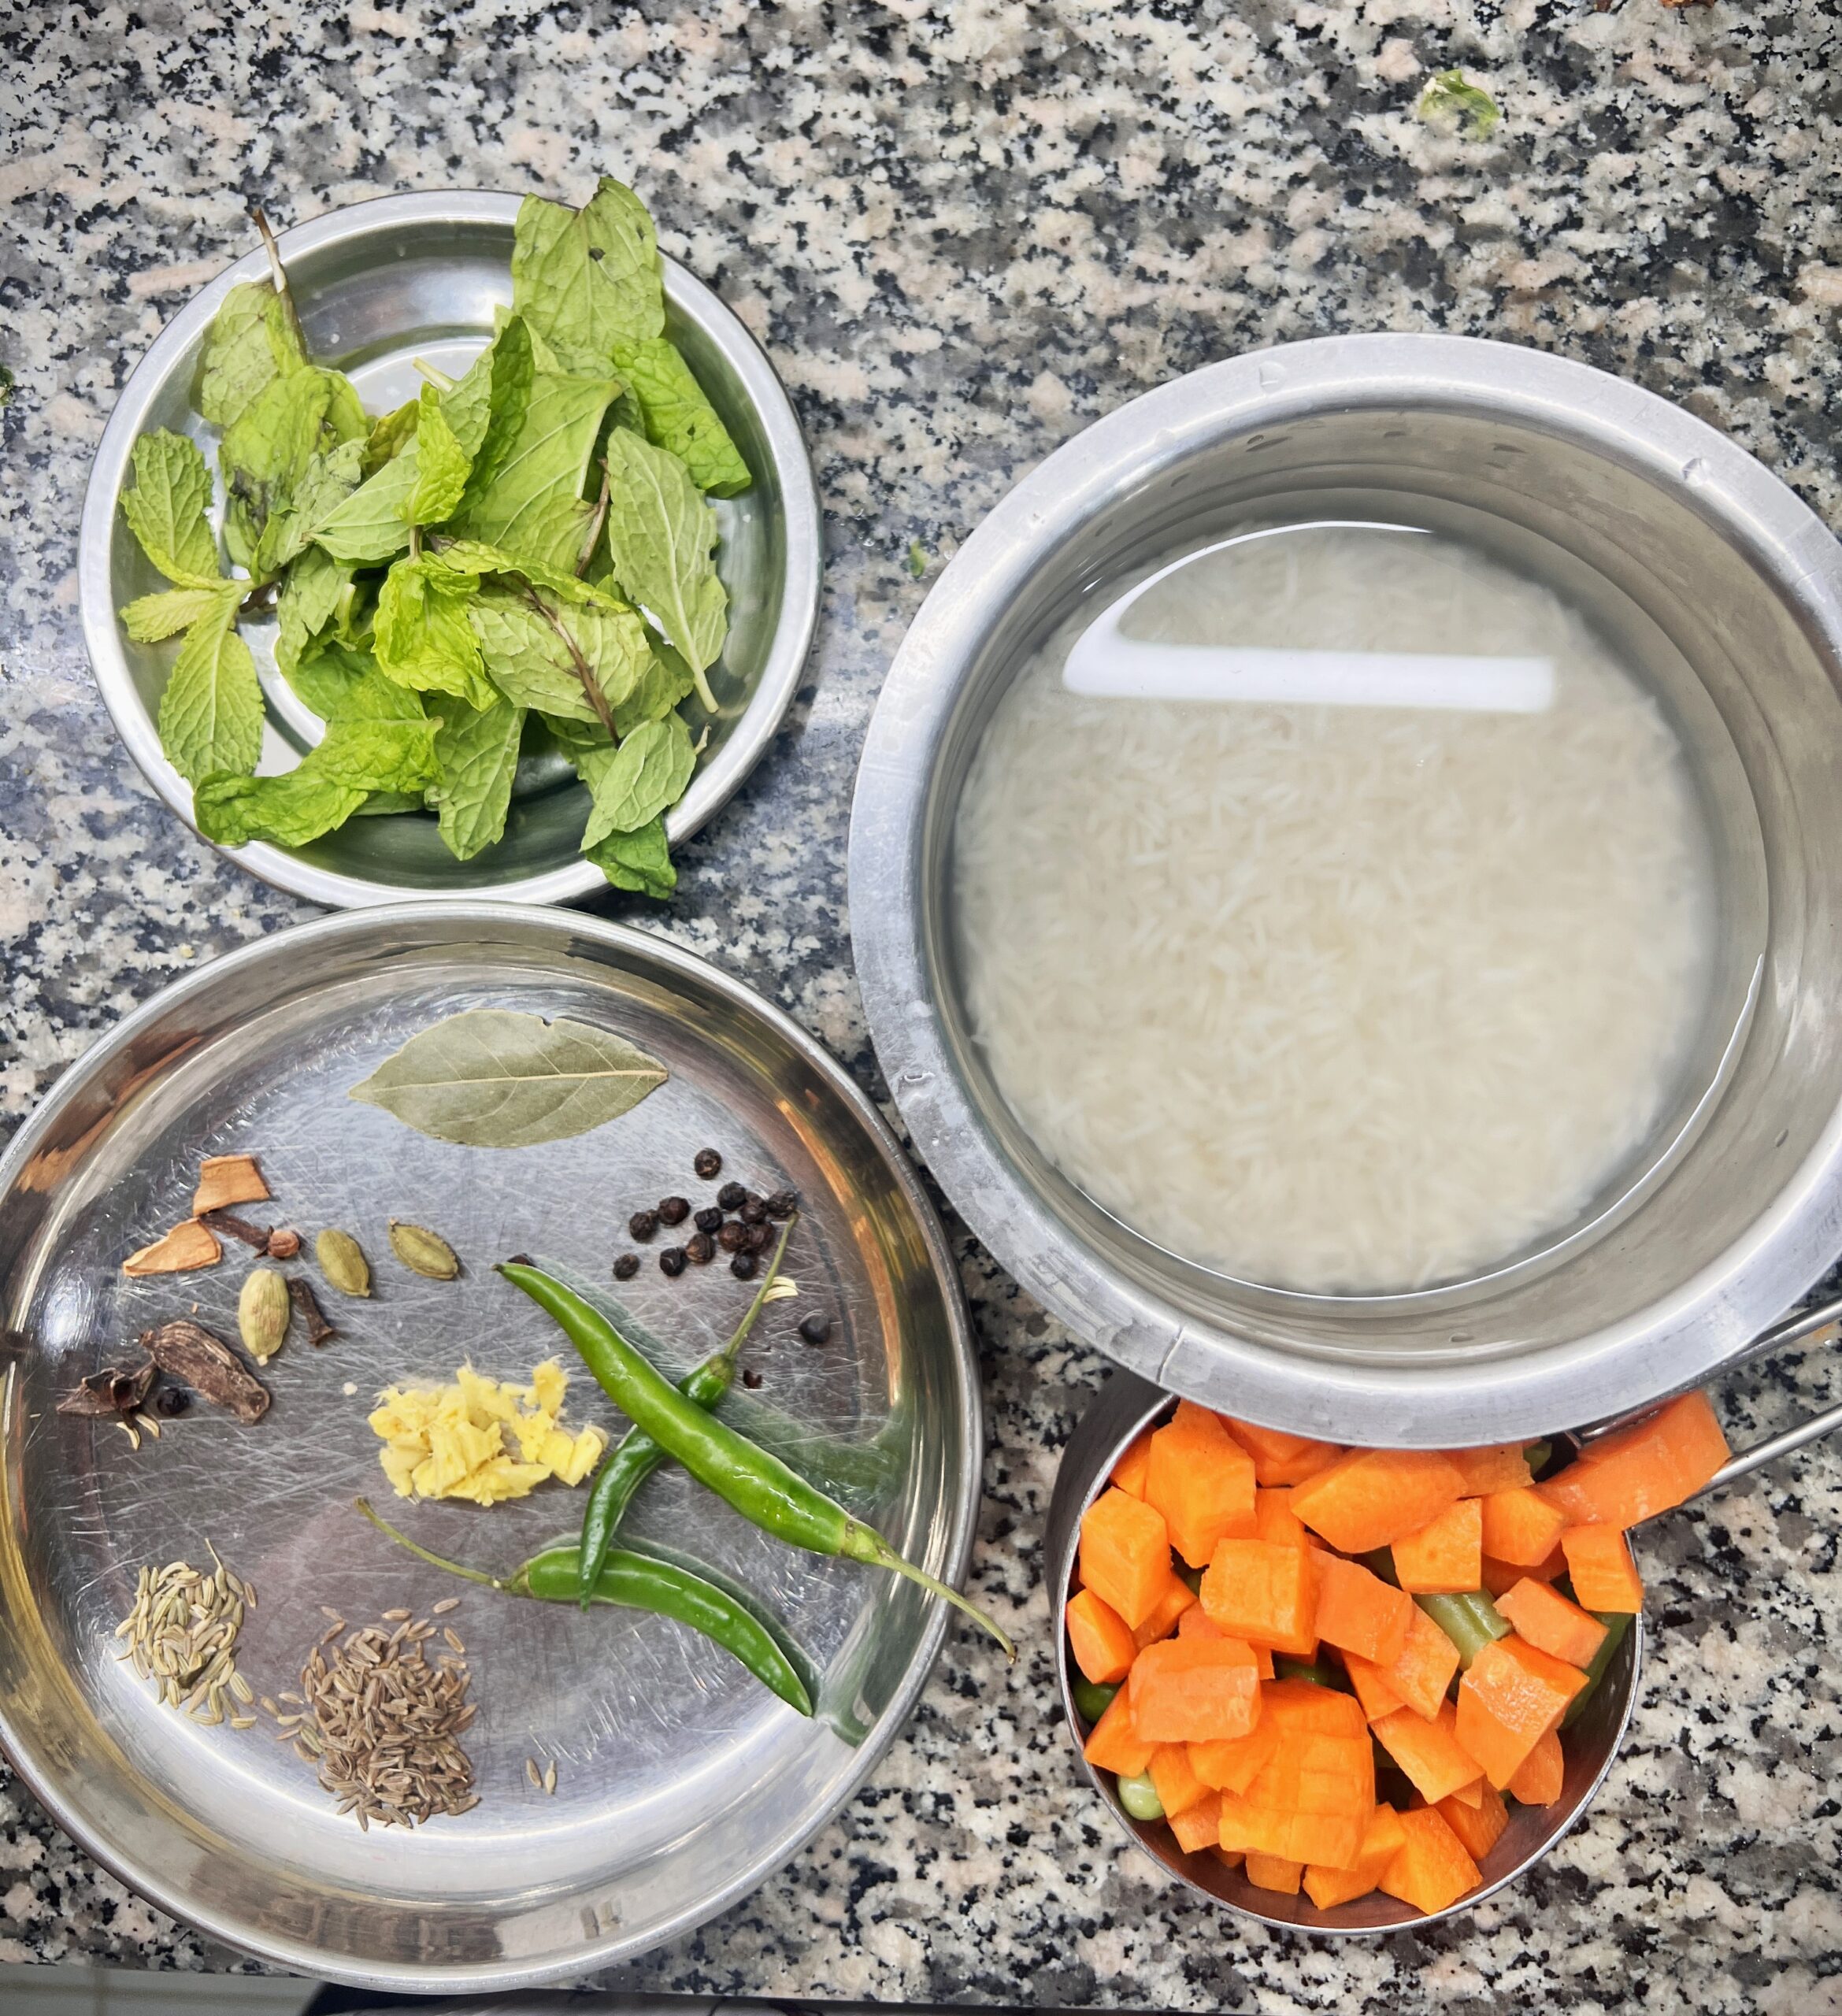 Ingredients for tricolor pulao